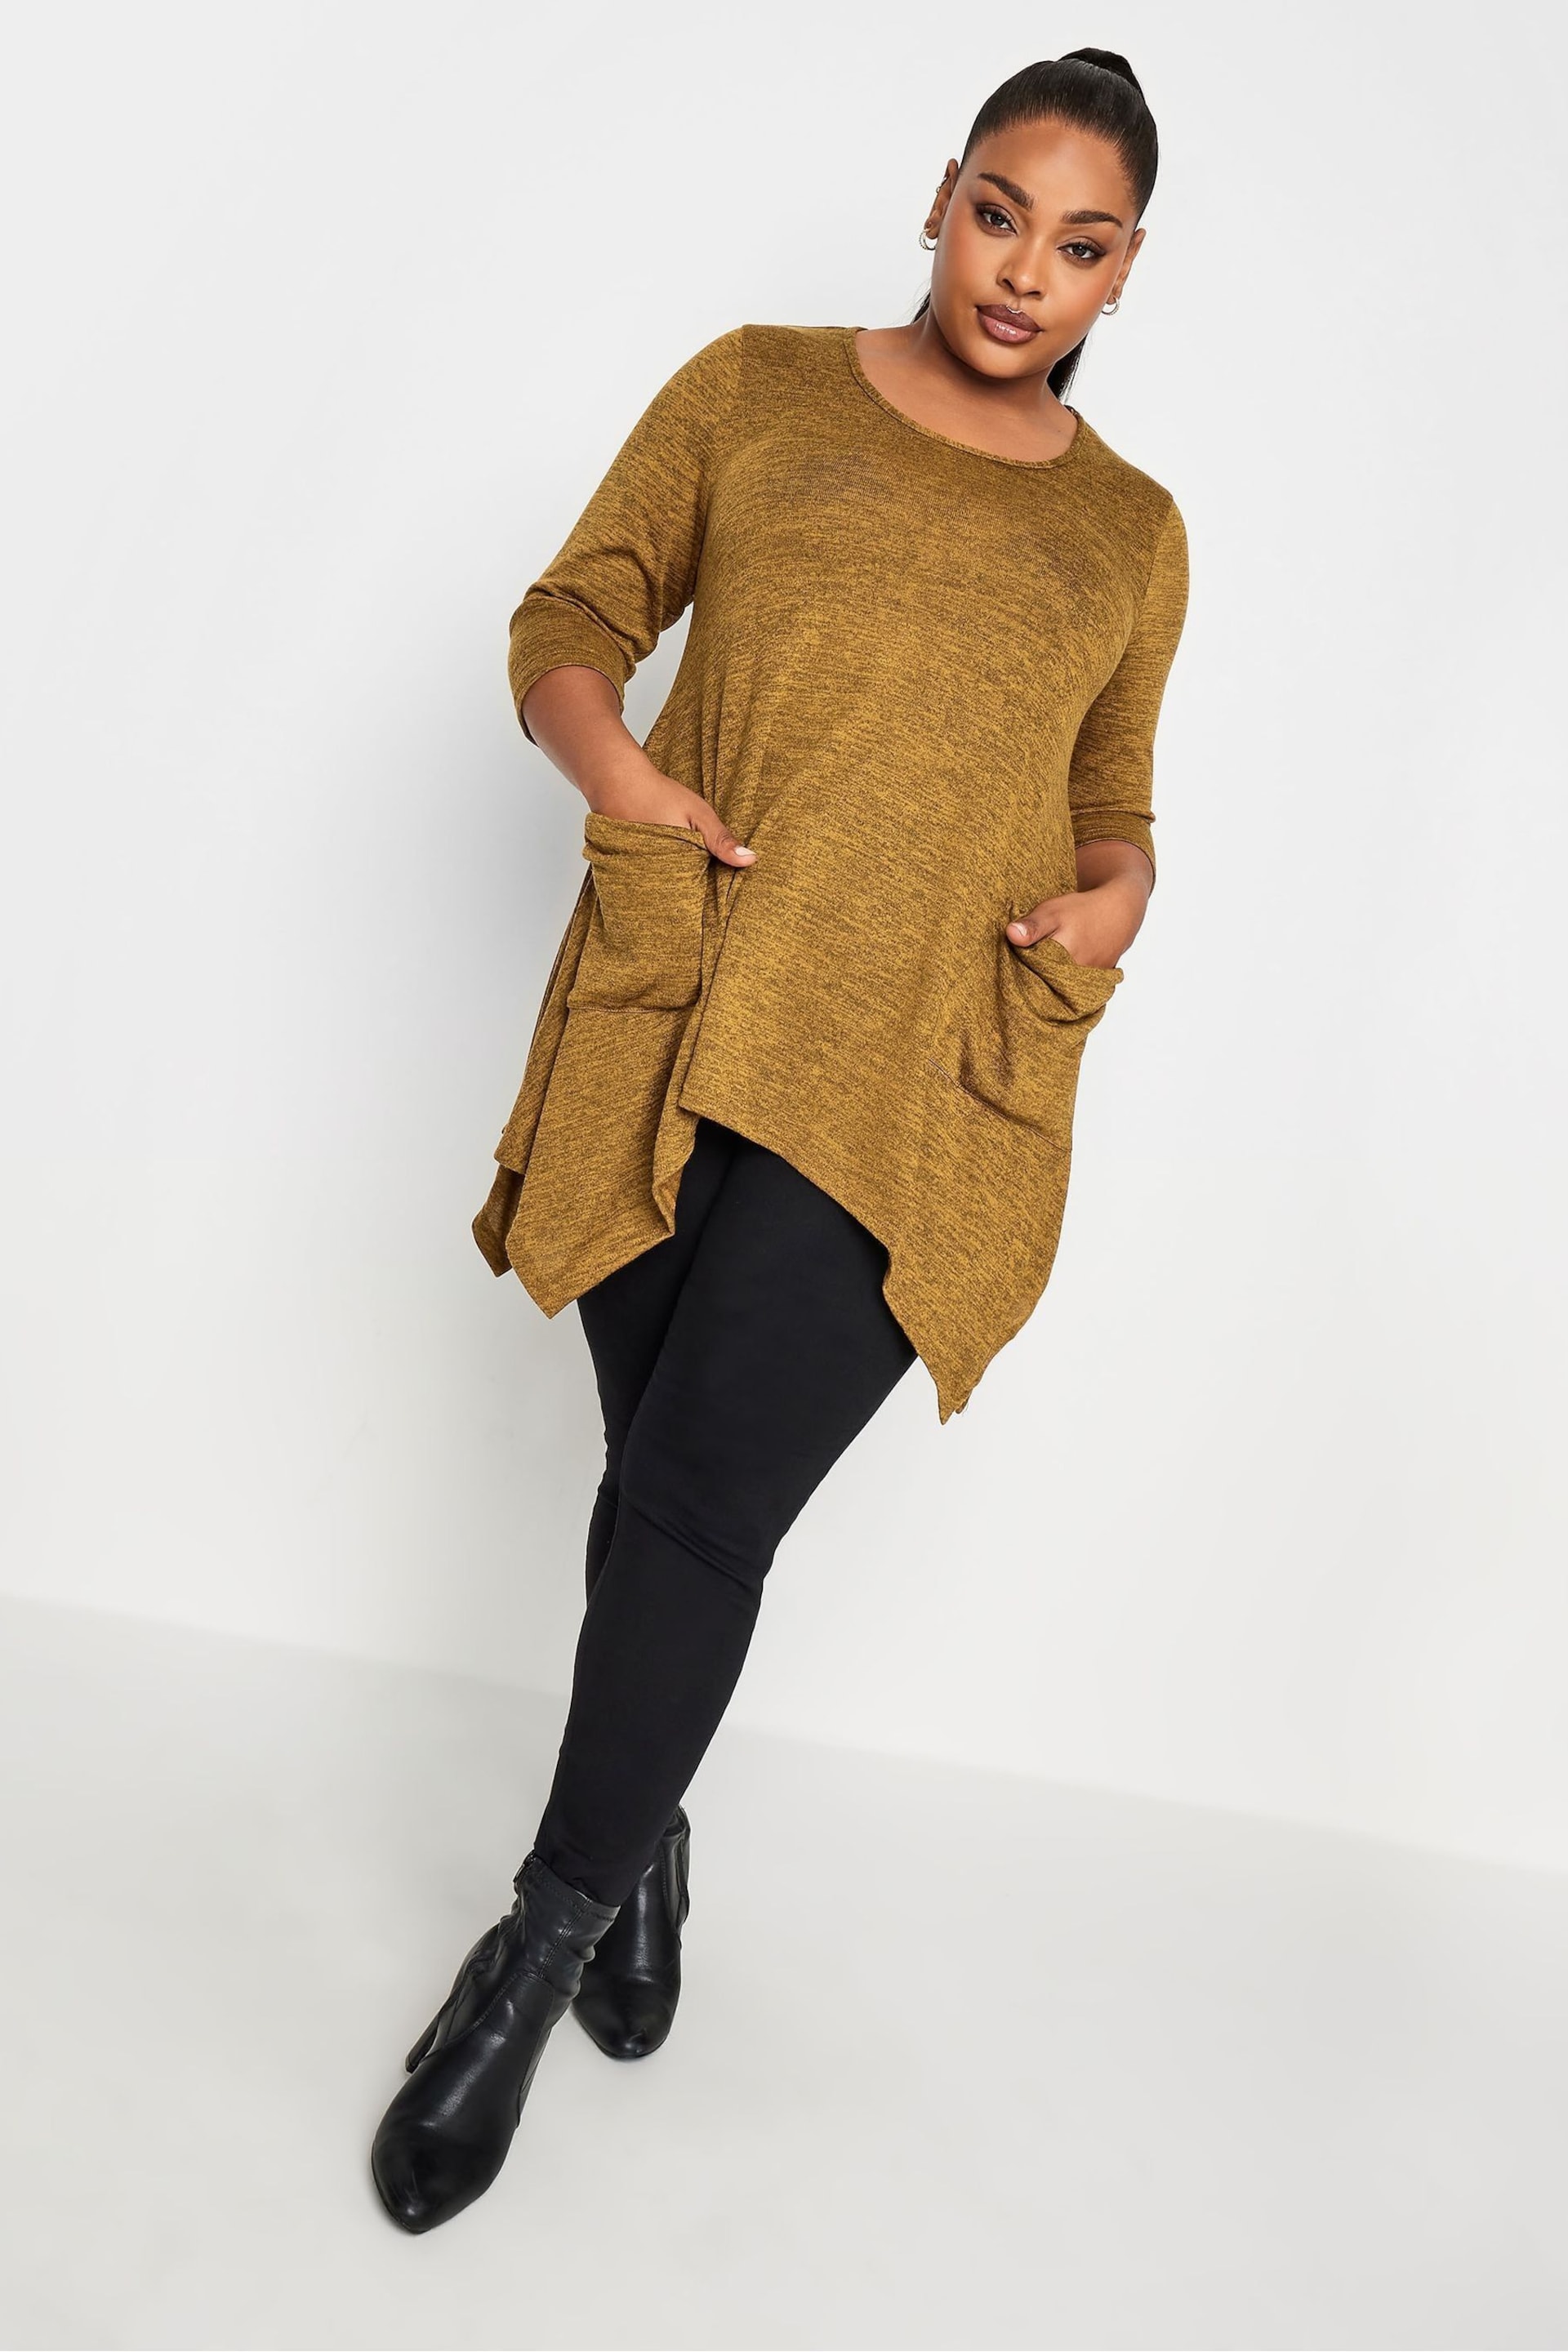 Yours Curve Brown Knitted Pocket Top - Image 2 of 4